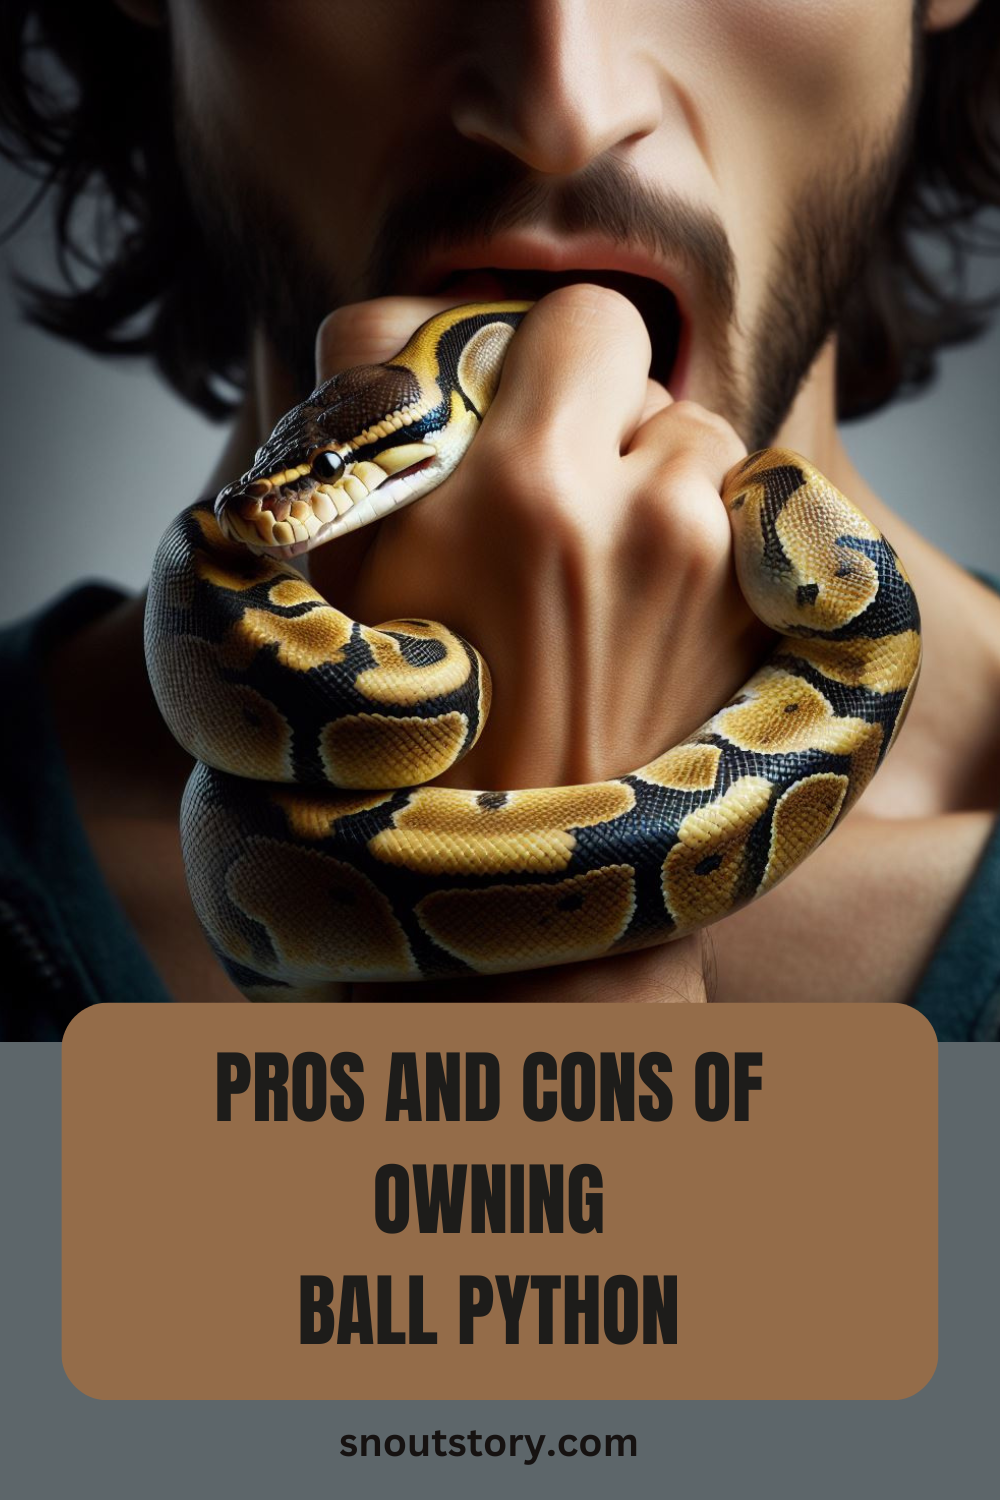 Pros and Cons of Owning a Ball Python